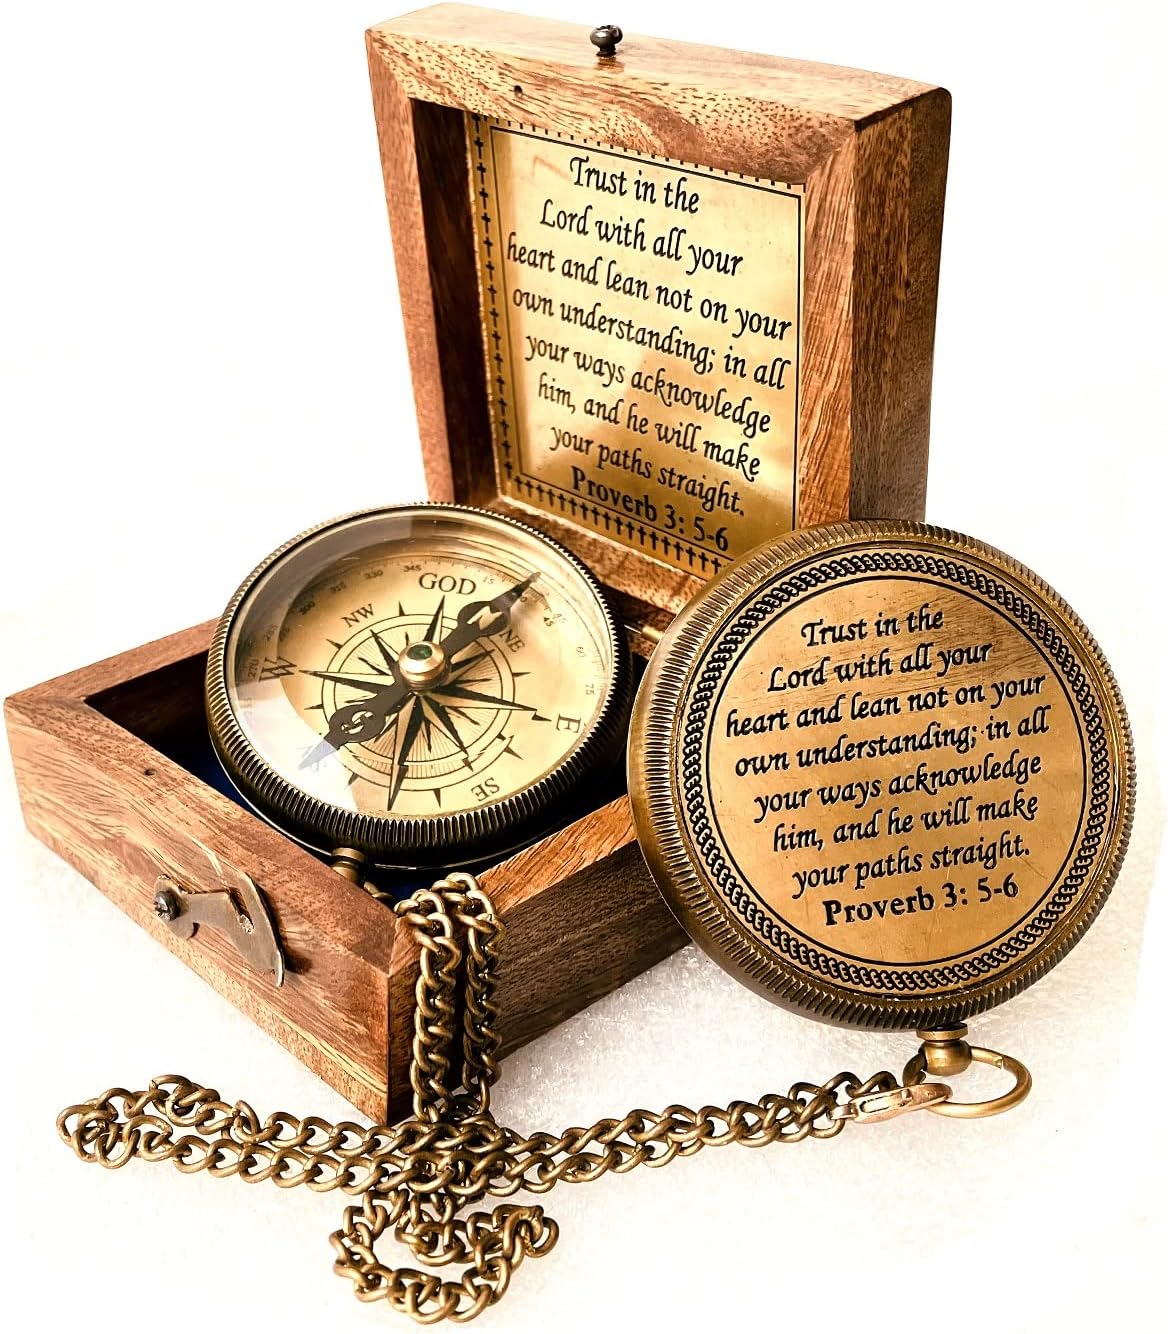 Trust in The Lord -Proverbs 3: 5-6 Quote Engraved Compass | Camping Compass Inspirational Christian Religious Gifts Men Women Catholic 2023 Graduation Gift Boys Girls